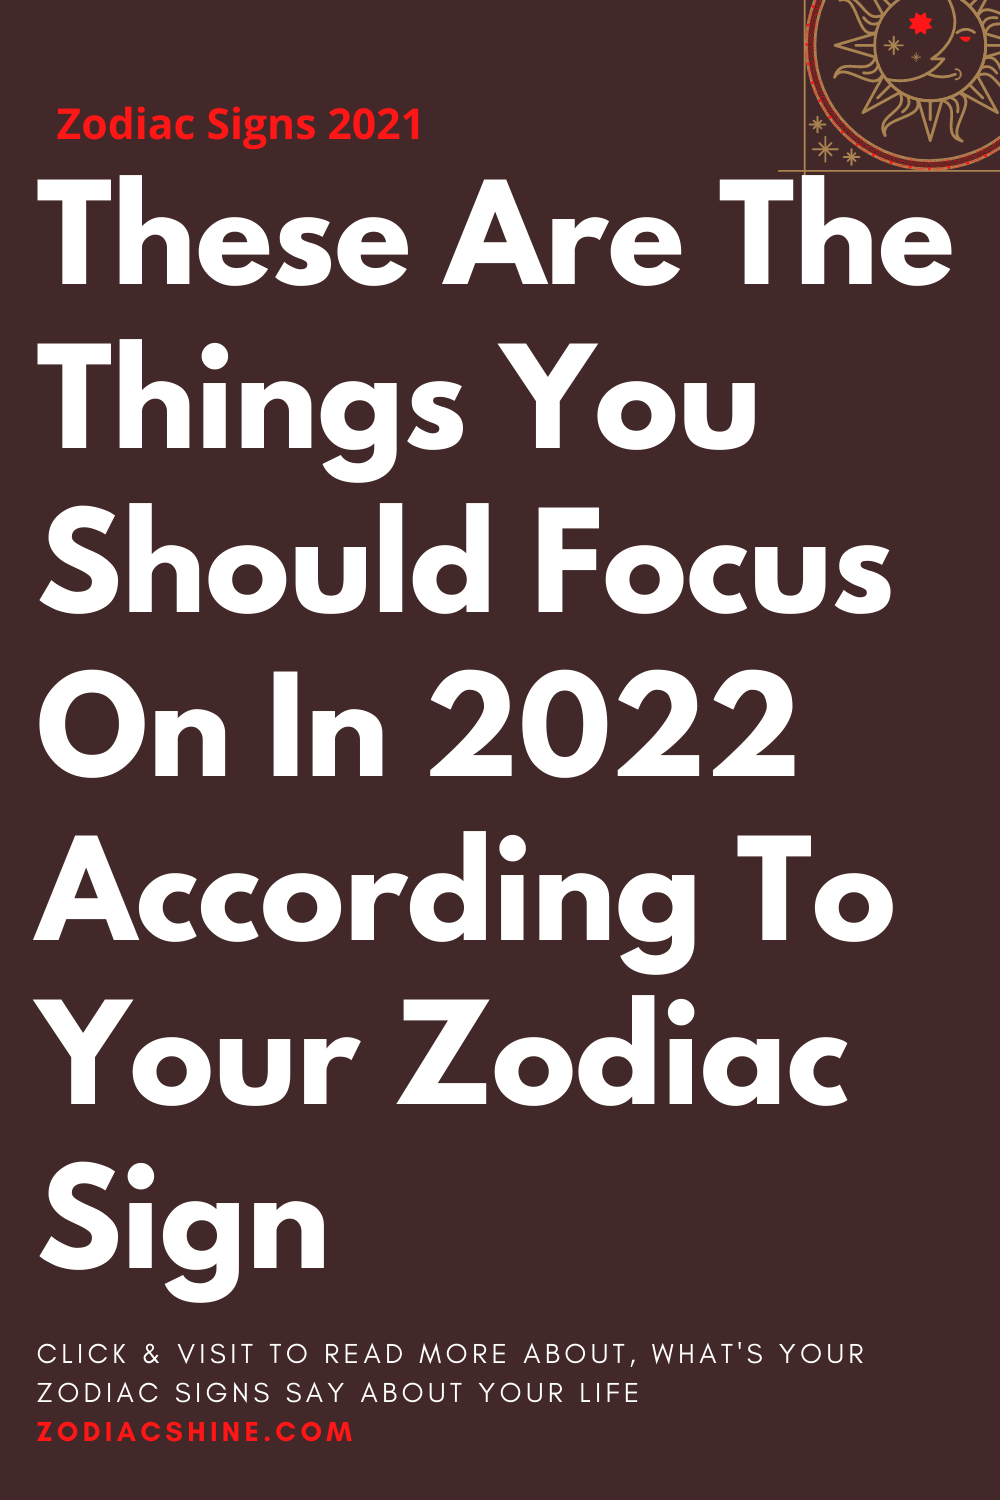 These Are The Things You Should Focus On In 2022 According To Your Zodiac Sign